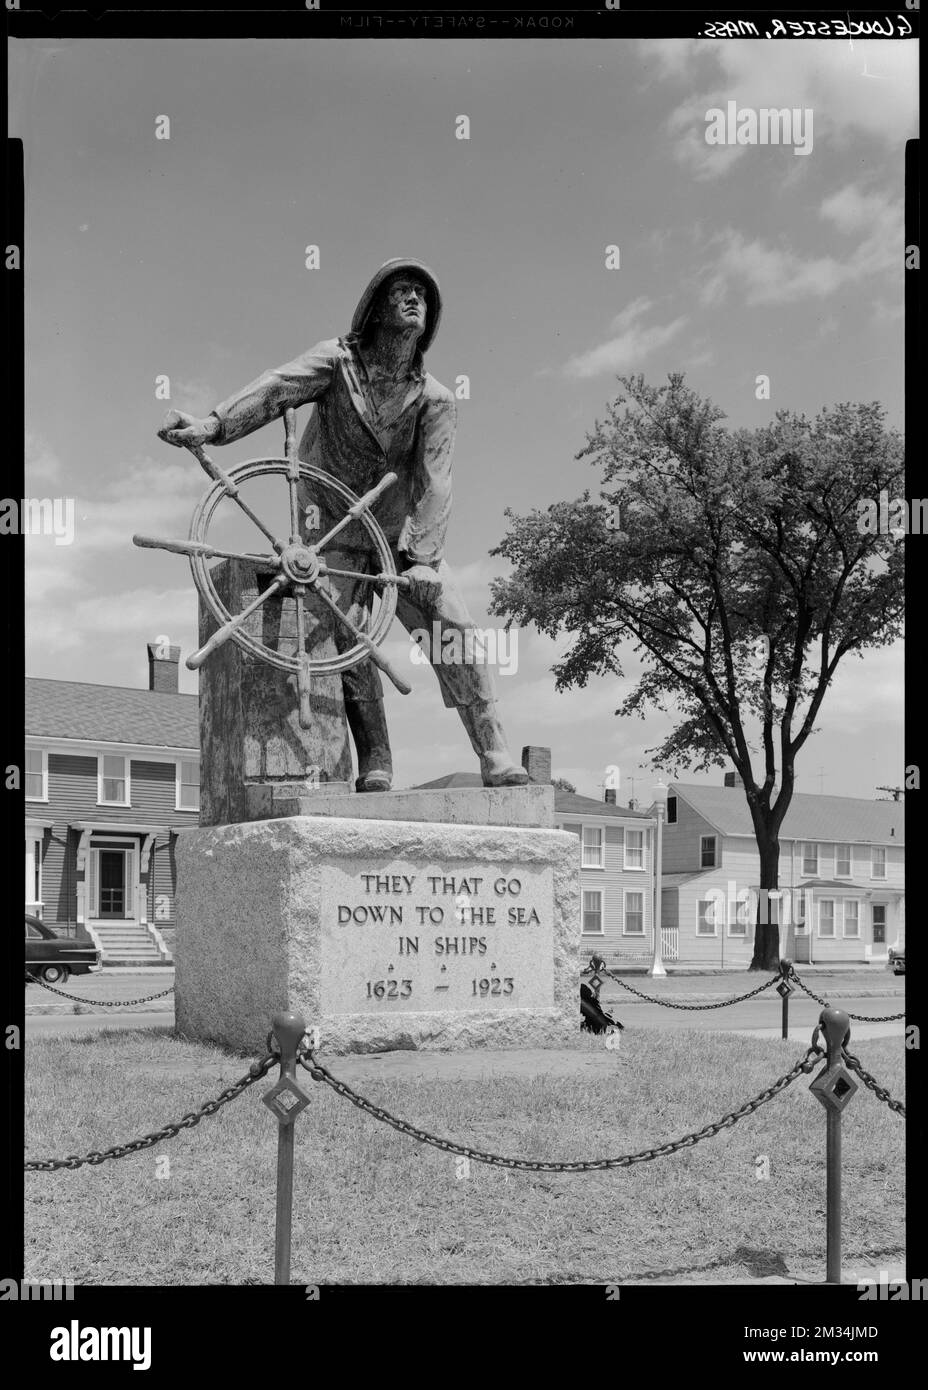 Gloucester, 'They that go down to the sea in ships,' statue , Monuments & memorials, Ship equipment & rigging. Samuel Chamberlain Photograph Negatives Collection Stock Photo